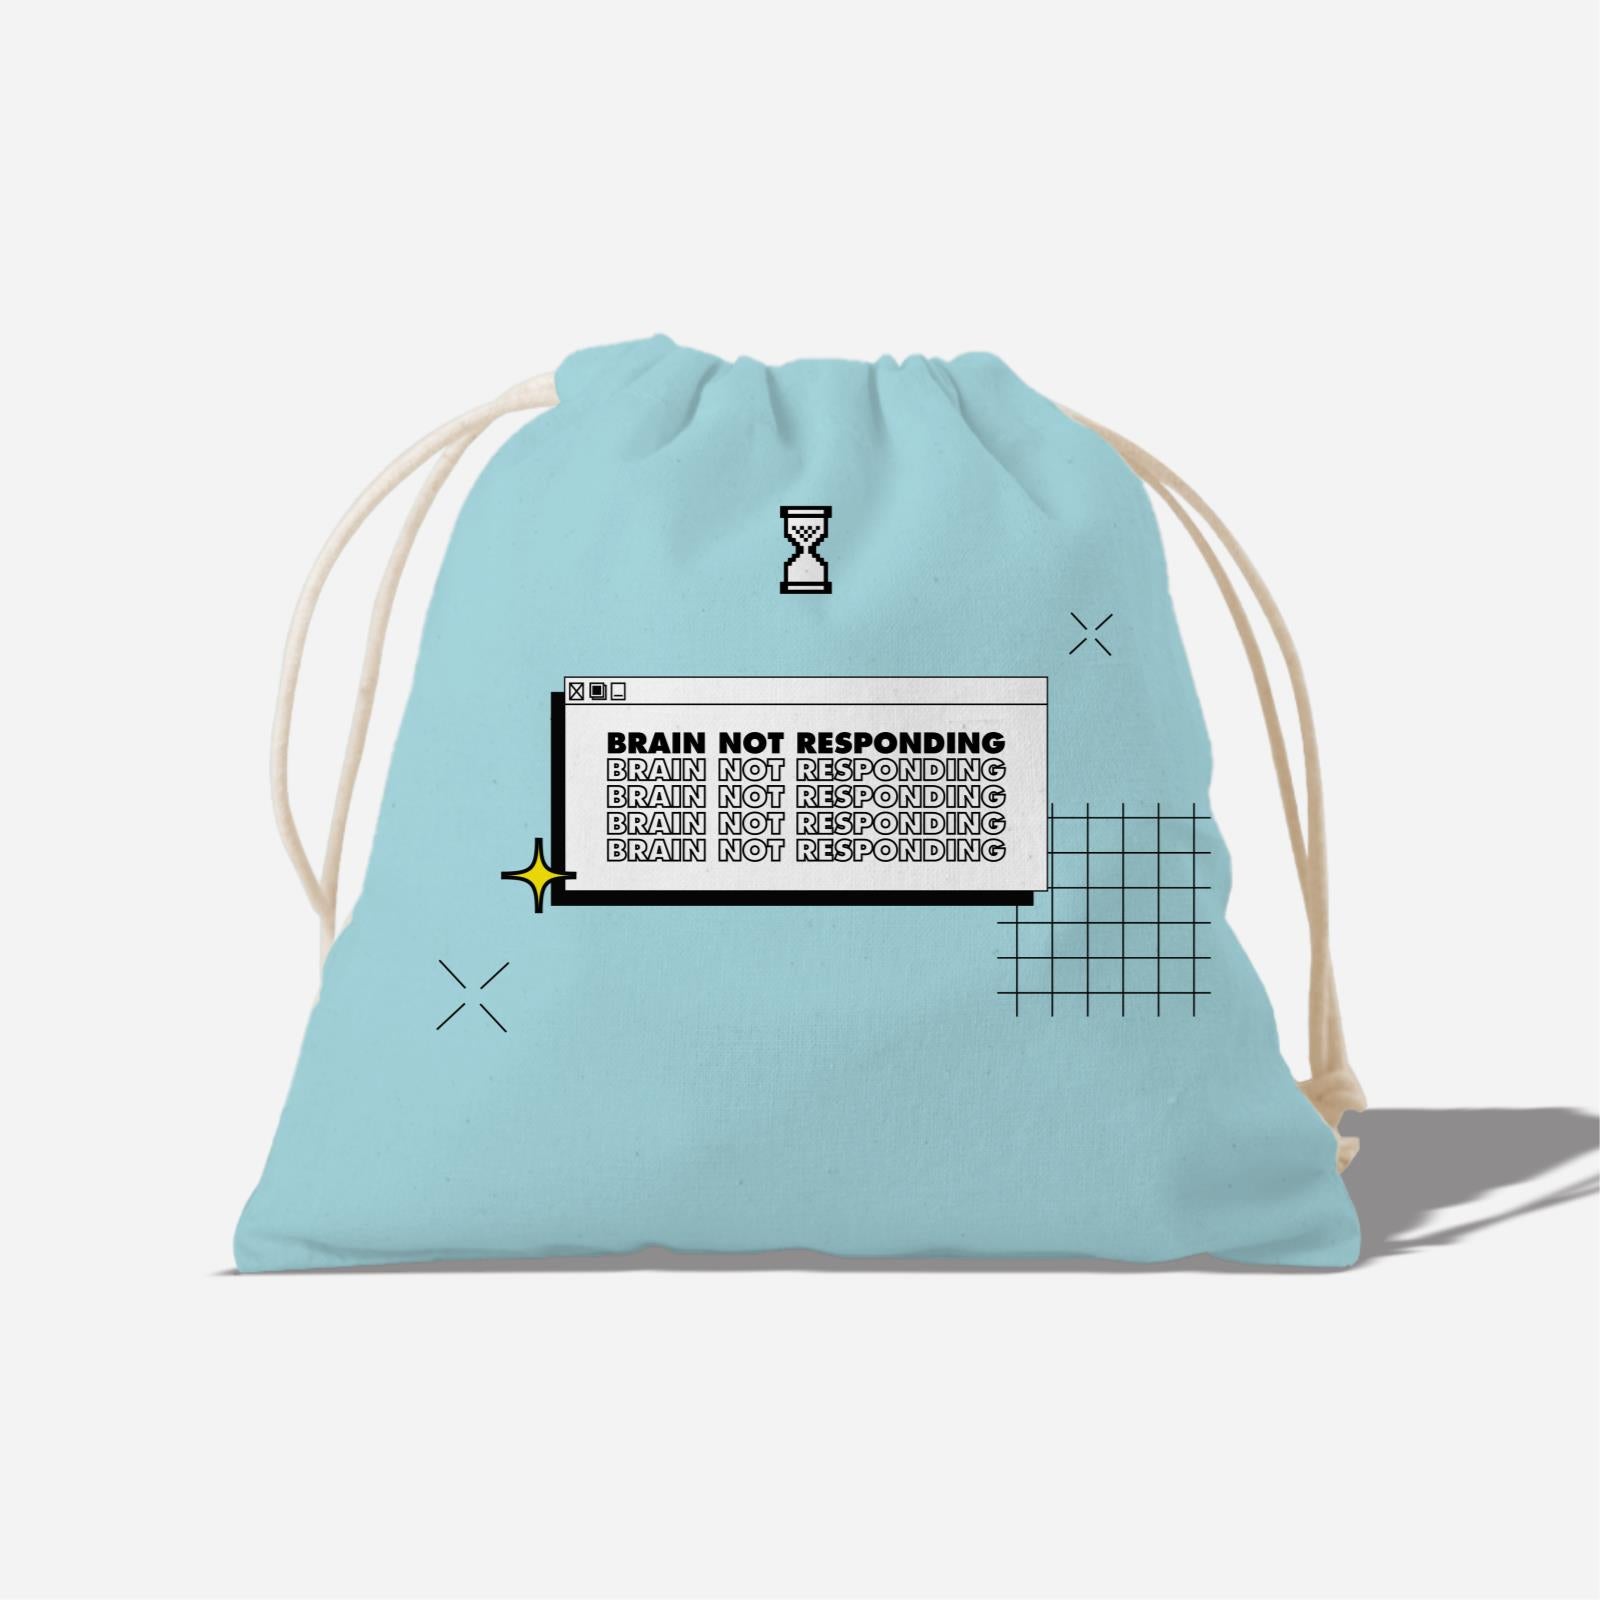 Be Confident Series Satchel - My Brain Has Too Many Tabs Open Blue